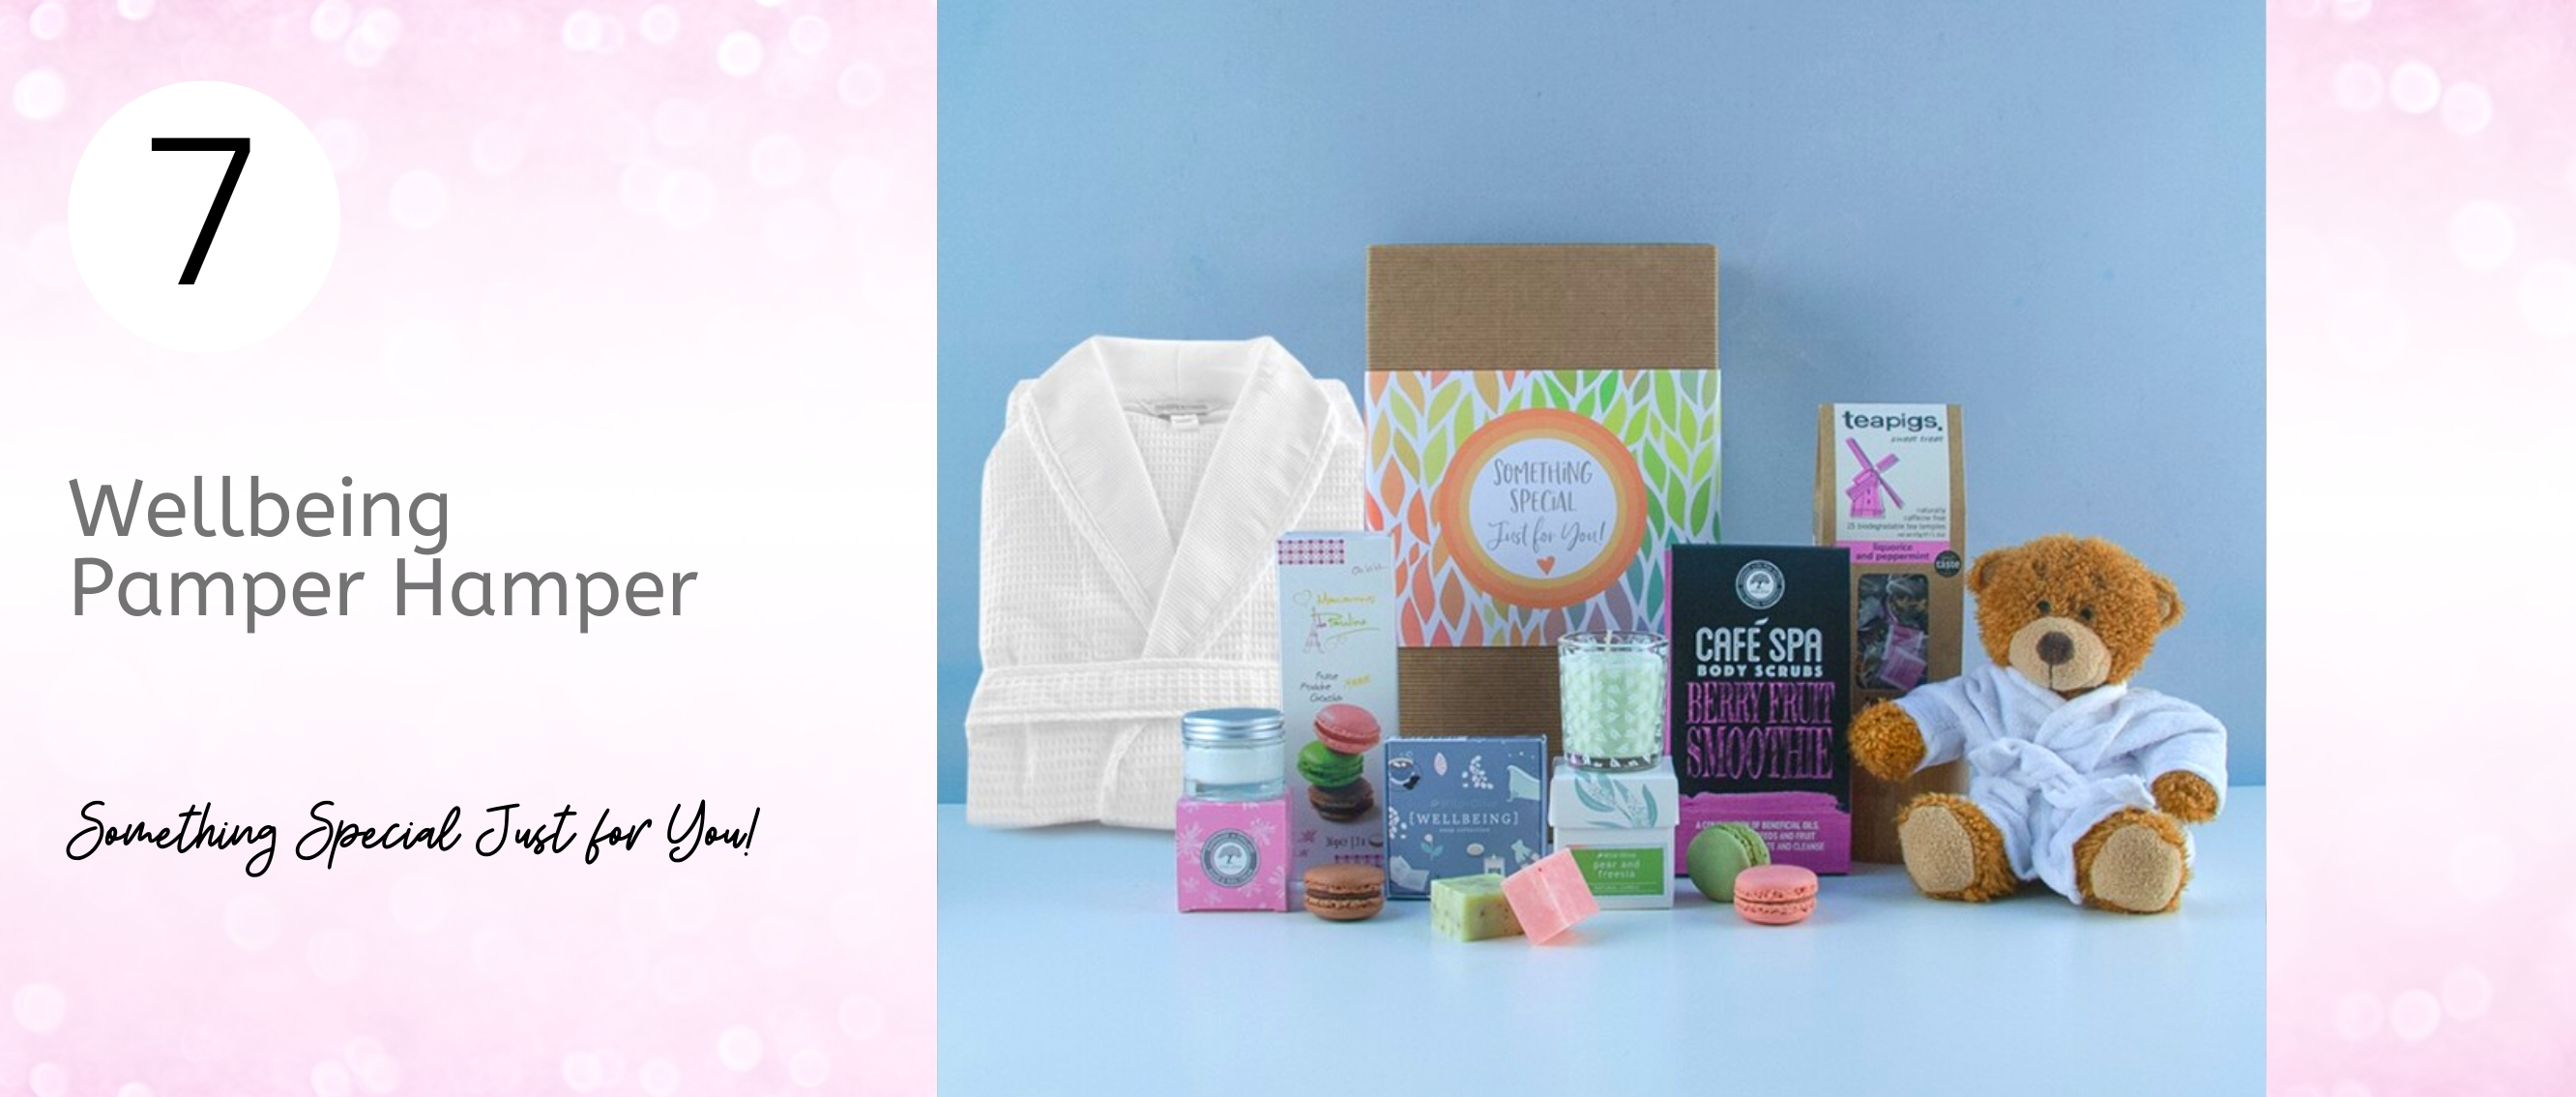 Bring the spa to Mum with this Wellbeing Pamper Hamper...